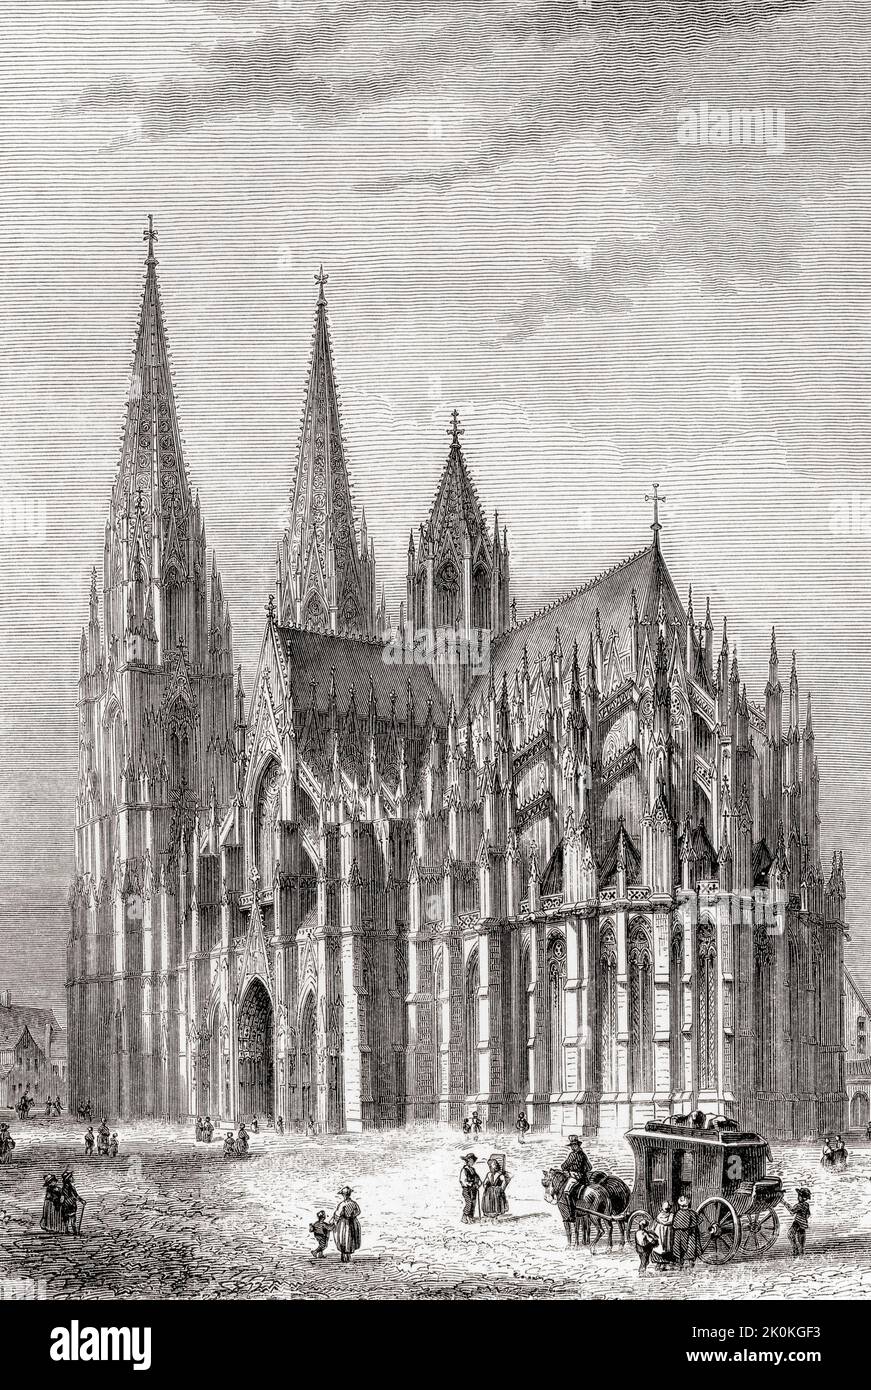 Cologne Cathedral, Cologne, North Rhine-Westphalia, Germany, seen here in the 19th century. Of Gothic architecture, consruction of the cathedral started in 1248 but was halted around 1560, work resumed again in 1842 until 1880, restoration began in the 1950's after the cathedral suffered damage by aerial bombs during World War II. From Les Plus Belles Eglises du Monde, published 1861. Stock Photo